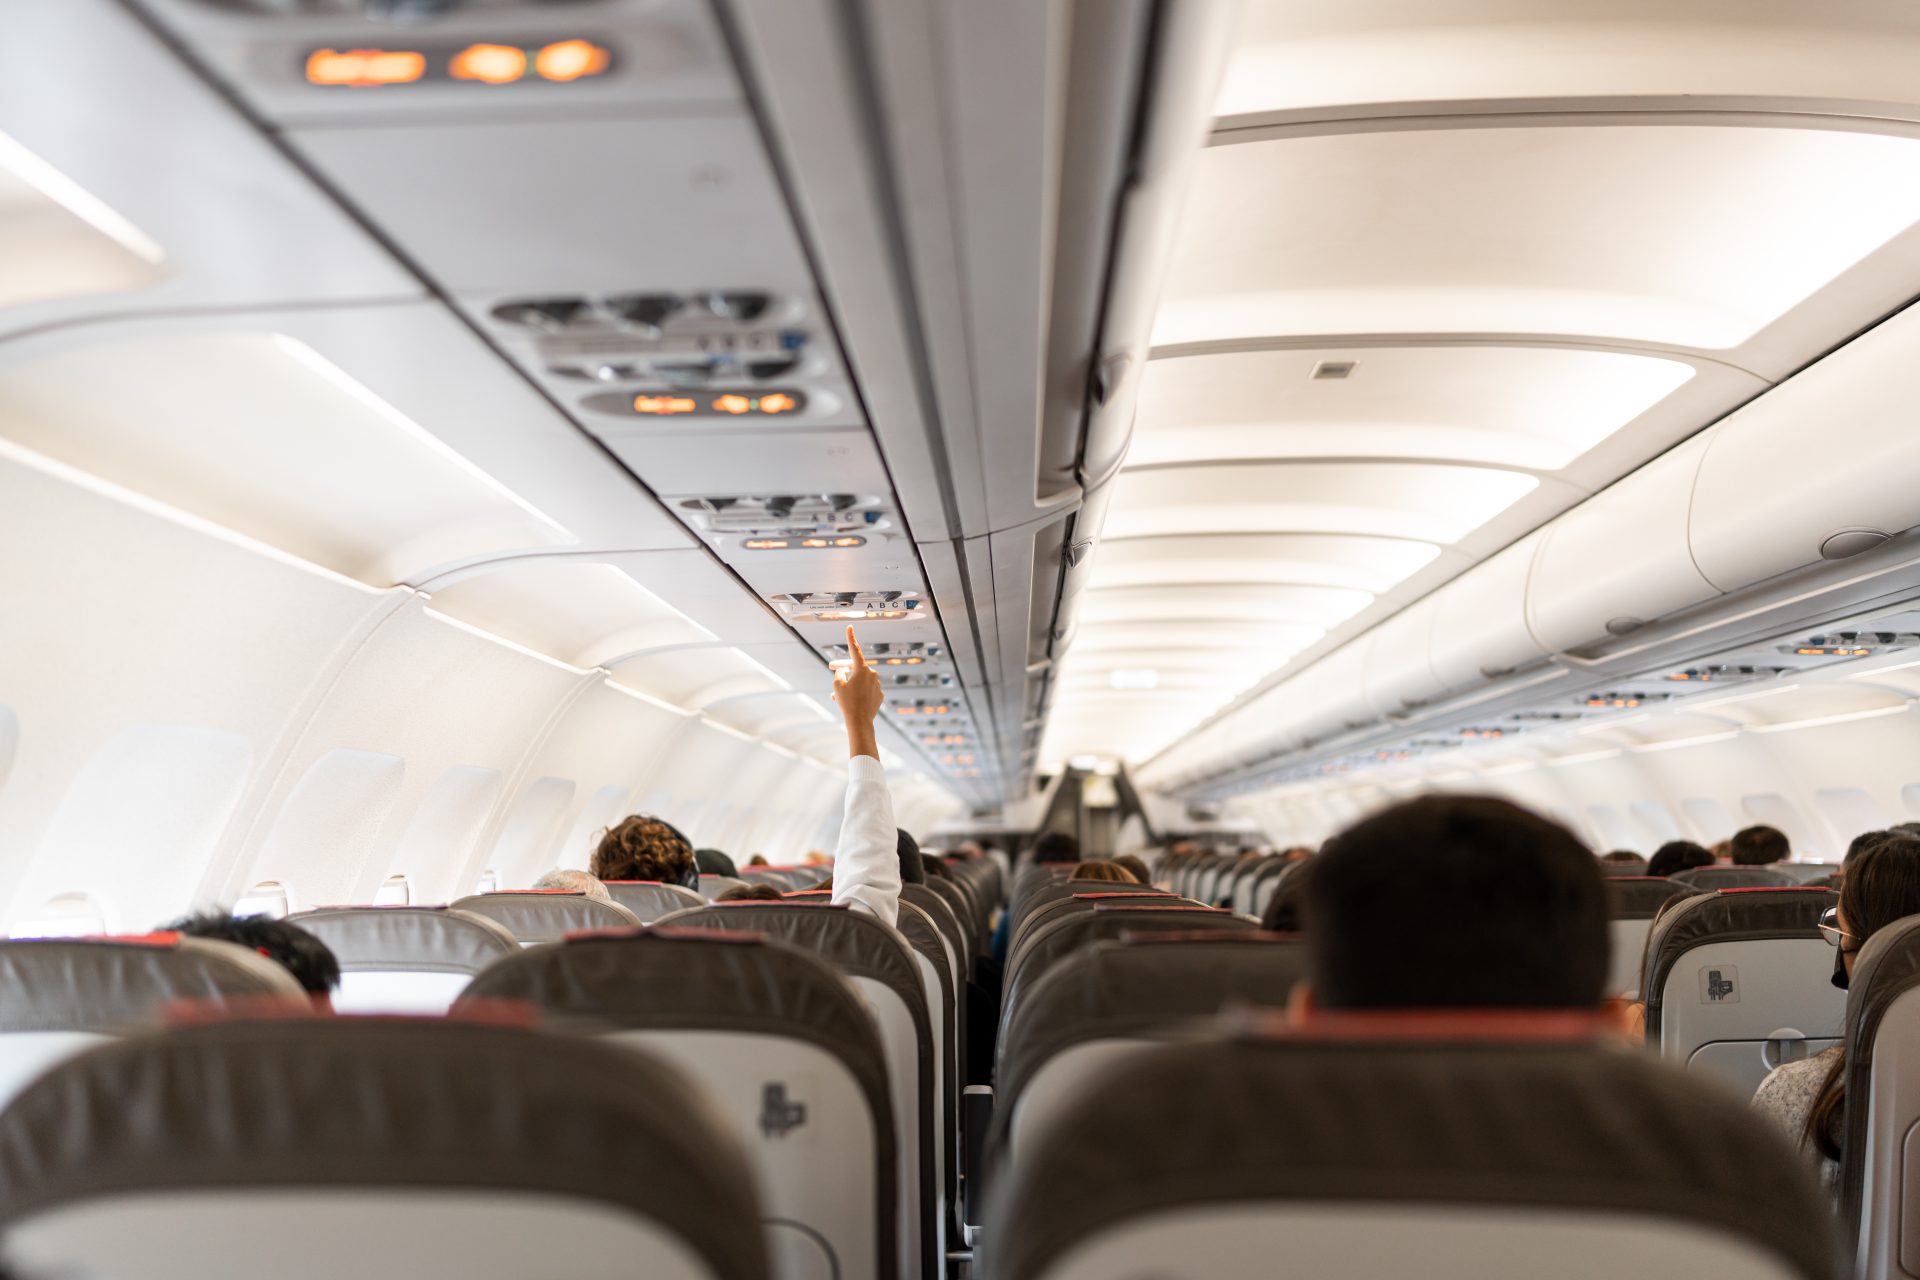 Airplanes are strange and you might not know these facts about them